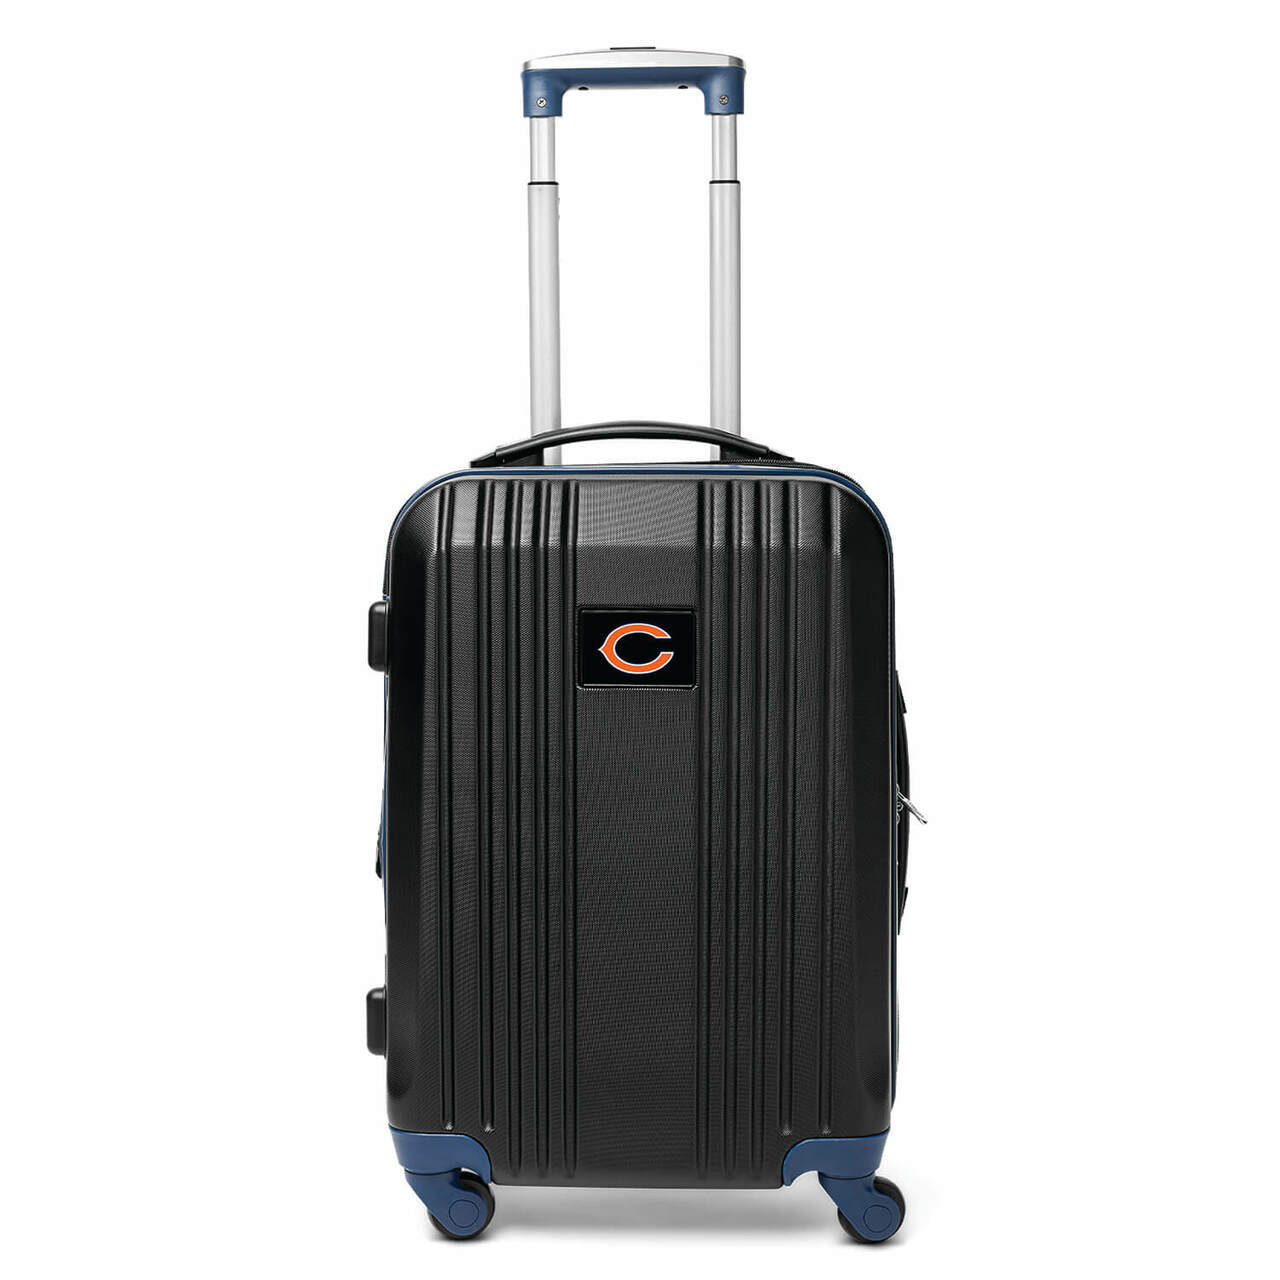 Bears Carry On Spinner Luggage | Chicago Bears Hardcase Two-Tone Luggage Carry-on Spinner in Black